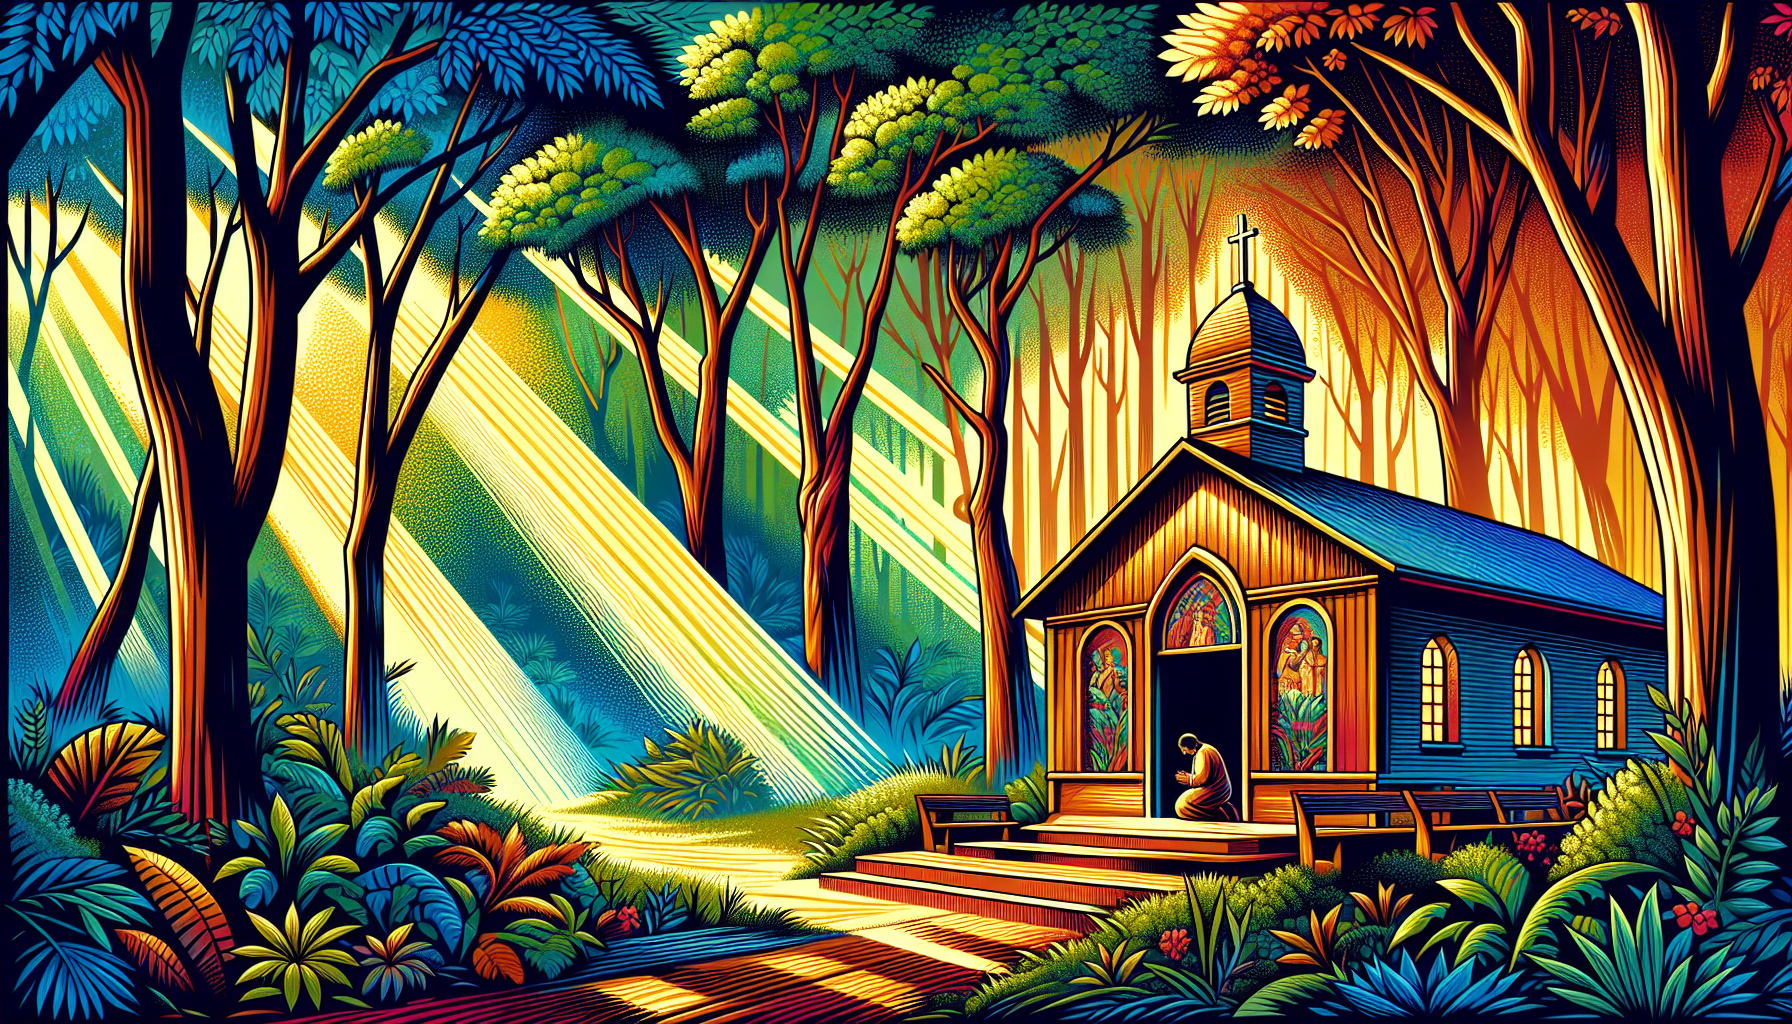 A serene chapel surrounded by a lush, tranquil forest, rays of sunshine filtering through the trees, highlighting a person kneeling in peaceful prayer inside the chapel.